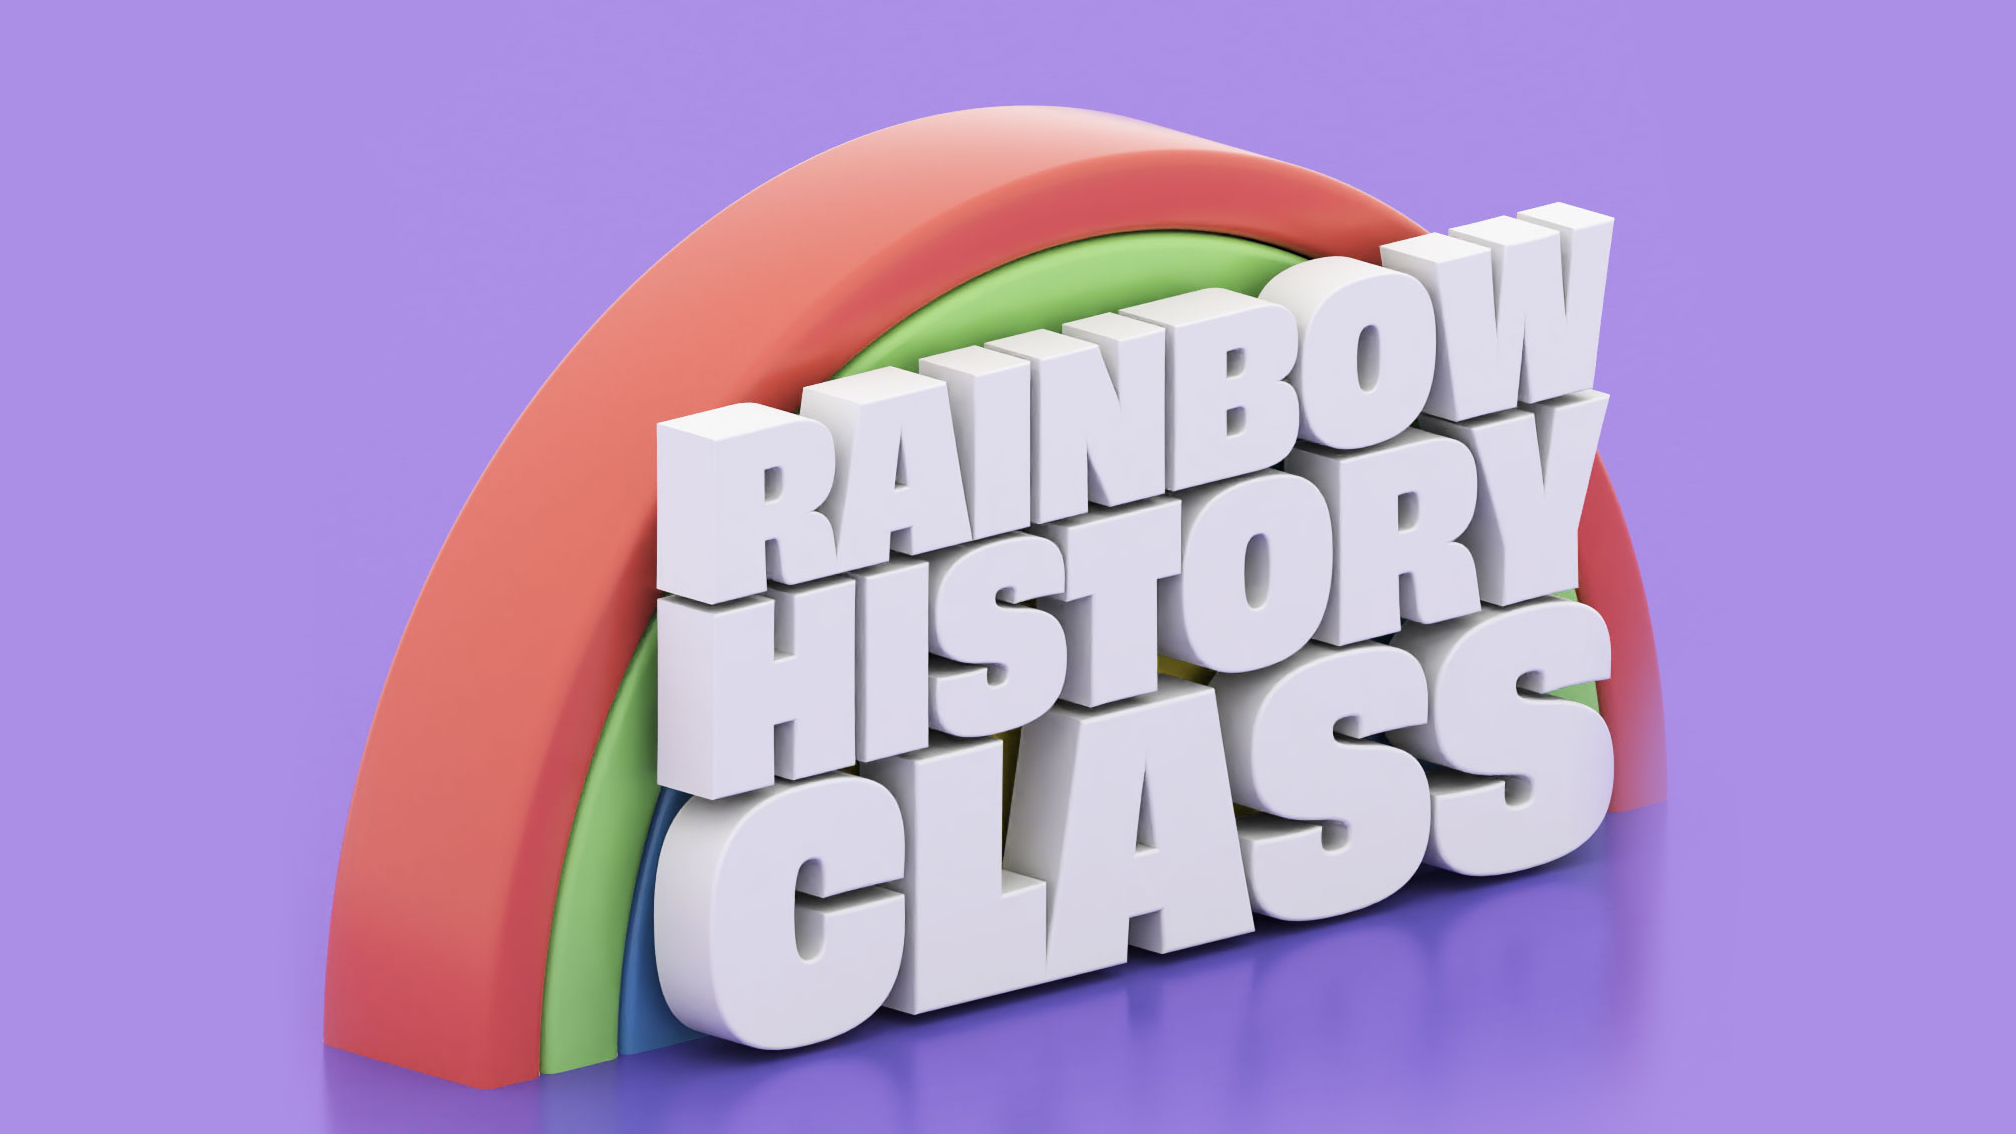 Snack Drawer celebrates the LGBTQIA+ community with the Rainbow History Class, 2023